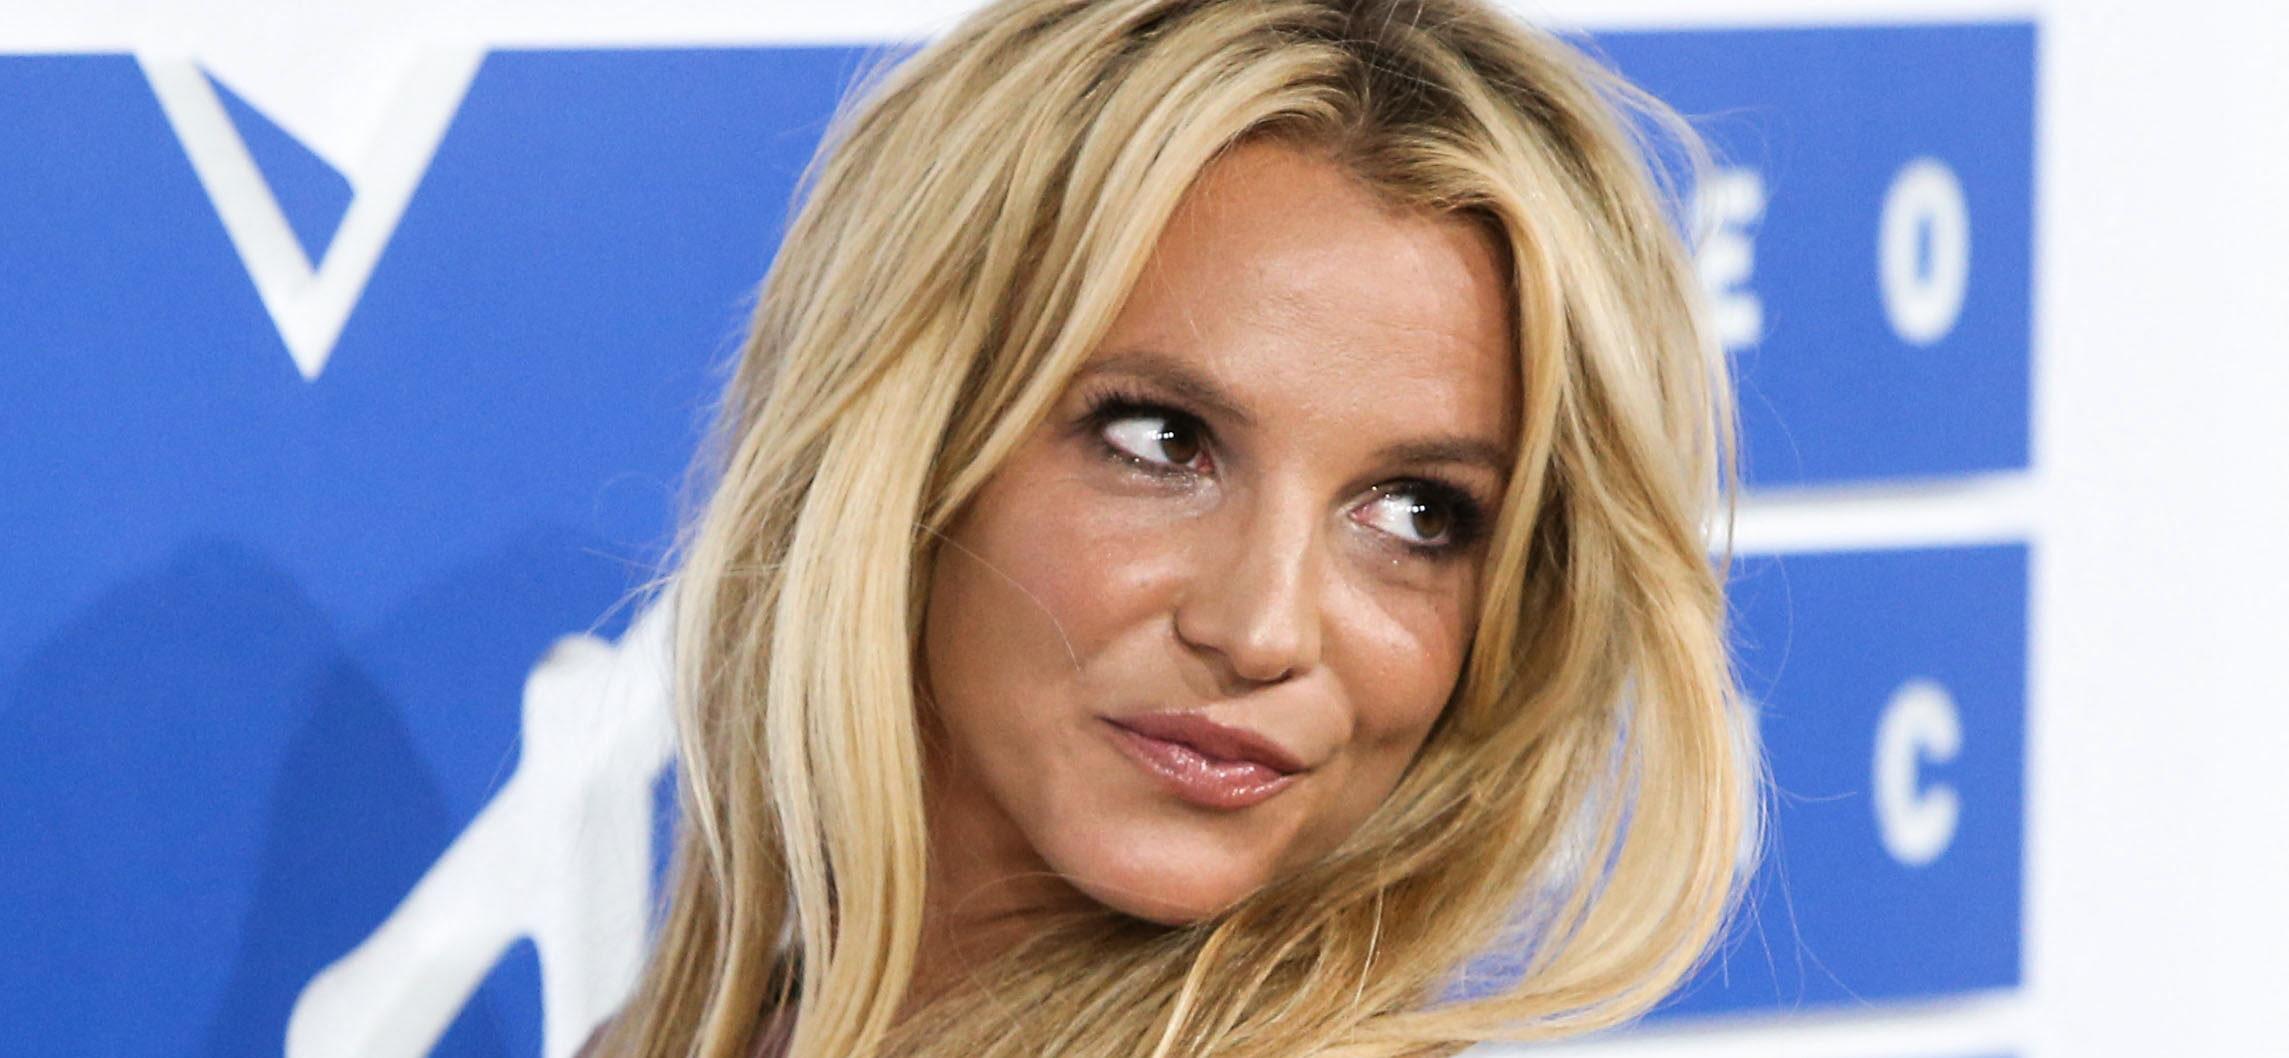 Britney Spears Lets One Of Her ‘Fav Boys’ Lick Her Leg Amid Divorce